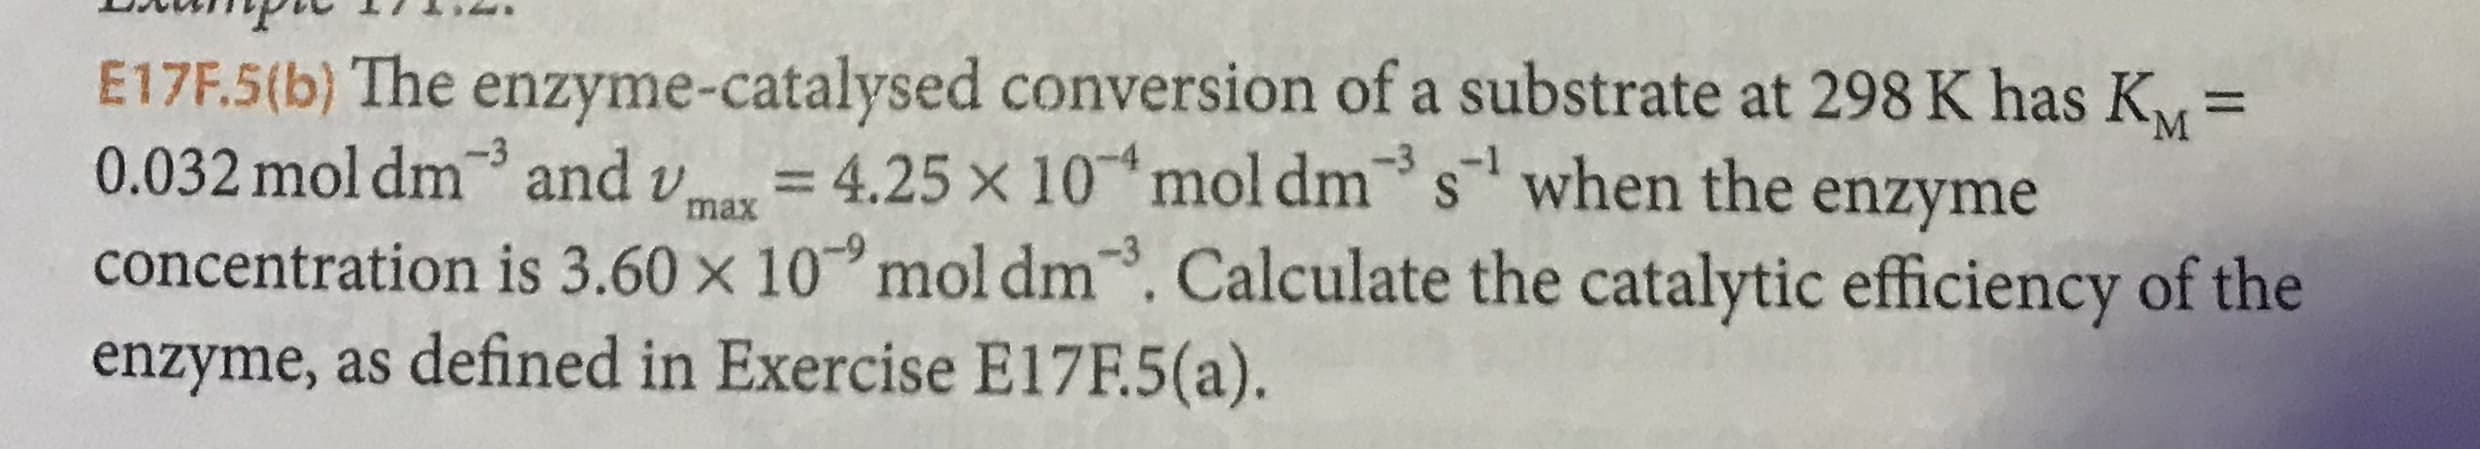 E17F.5(b) The enzyme-catalysed conversion of a substrate at 298K has K
0.032mol dm and
concentration is 3.60 x 10 mol dm. Calculate the catalytic efficiency of the
enzyme, as defined in Exercise E17F.5(a).
= 4.25 x 10 mol dm
-3
swhen the enzyme
max
